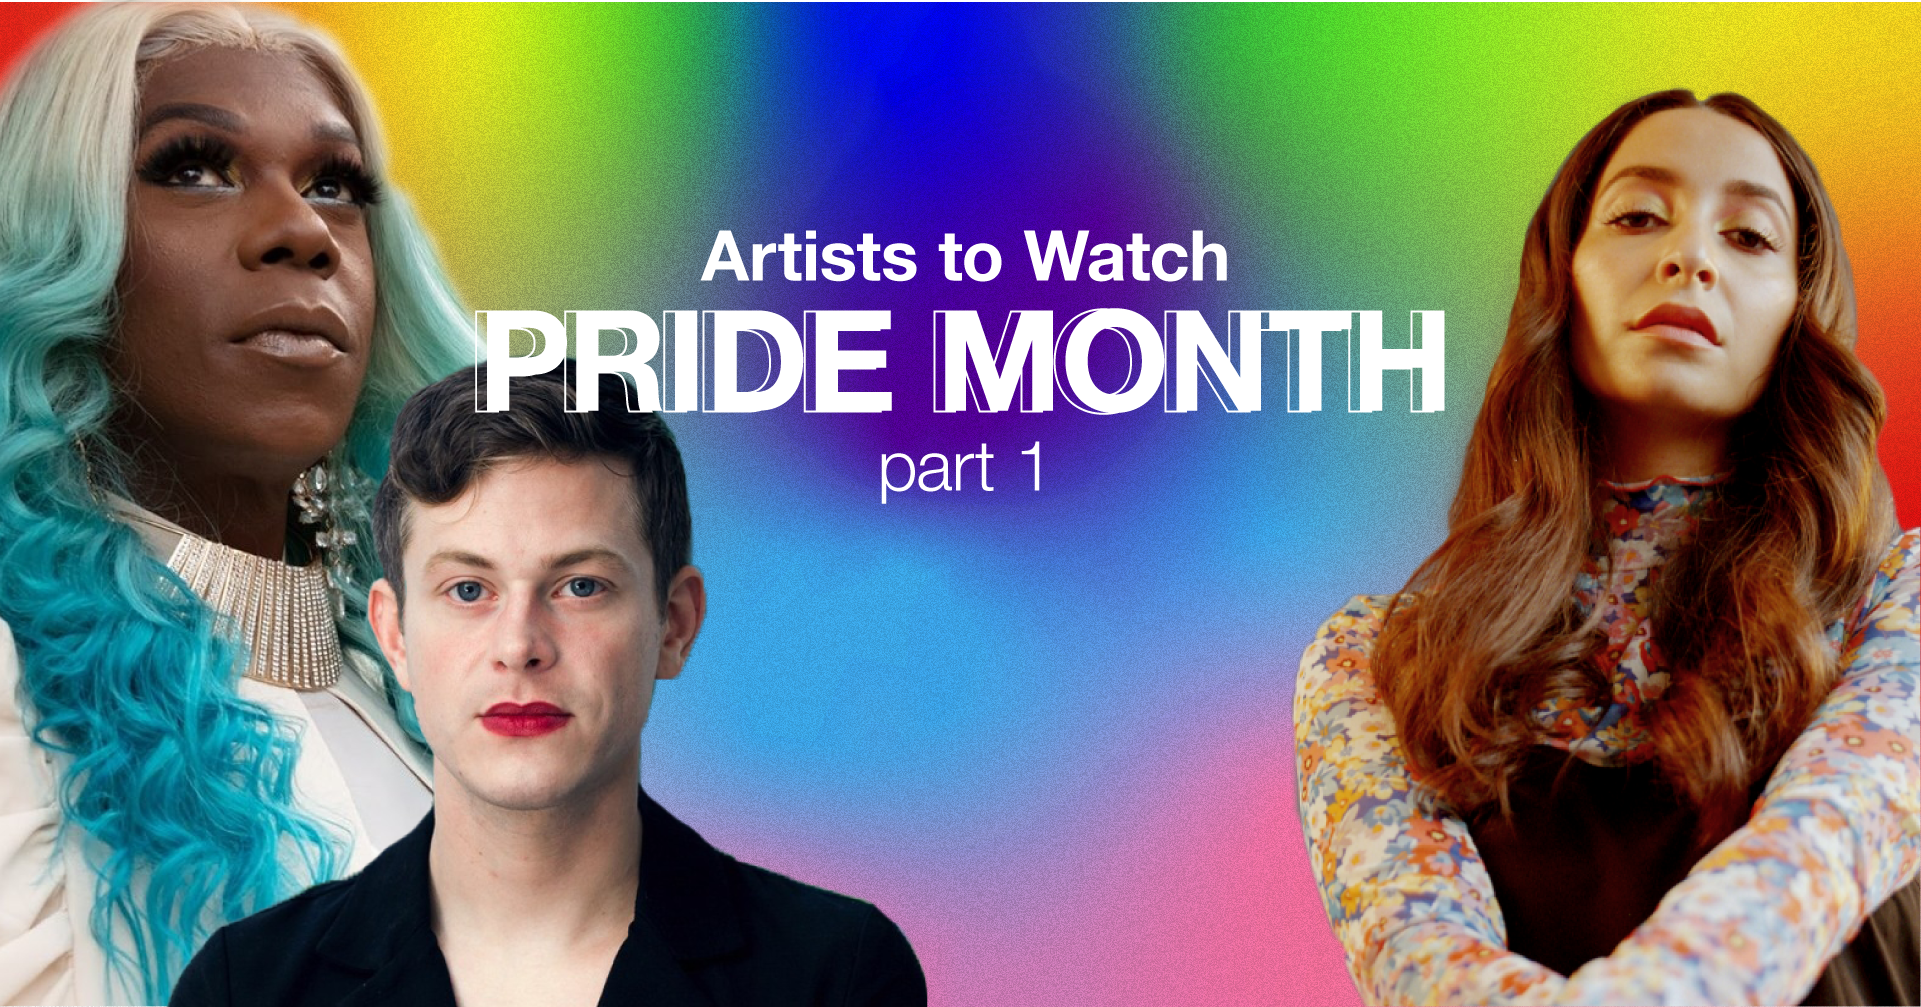 🏳️‍🌈 Artists to Watch: Pride Month - Part 1